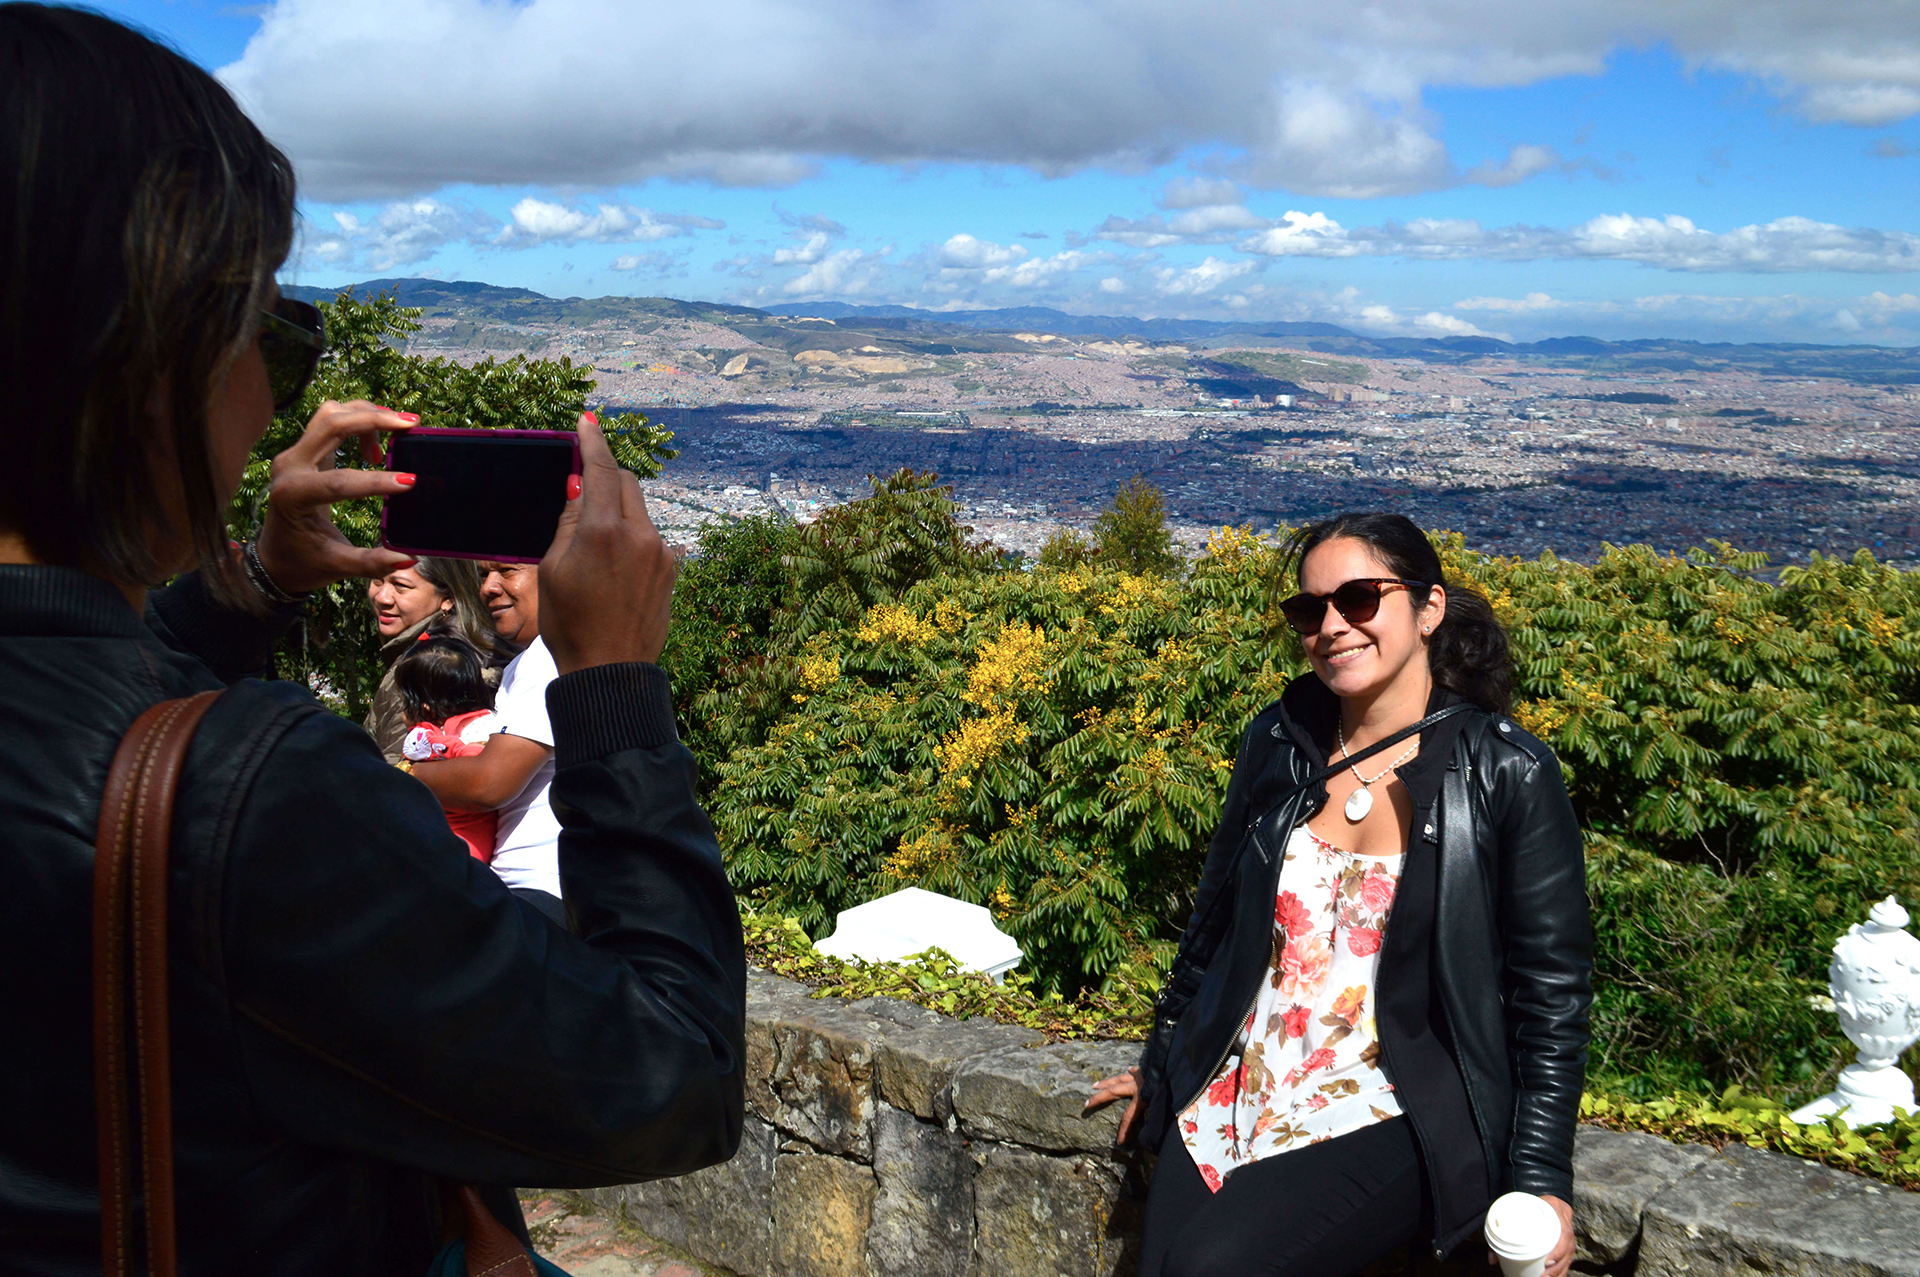 A person takes a photograph of a smiling woman in a floral top and leather jacket standing by a stone wall with a panoramic view of the city and mountains of Bogotá in the background, capturing one of the many highlights you can experience on Bogota city tours.